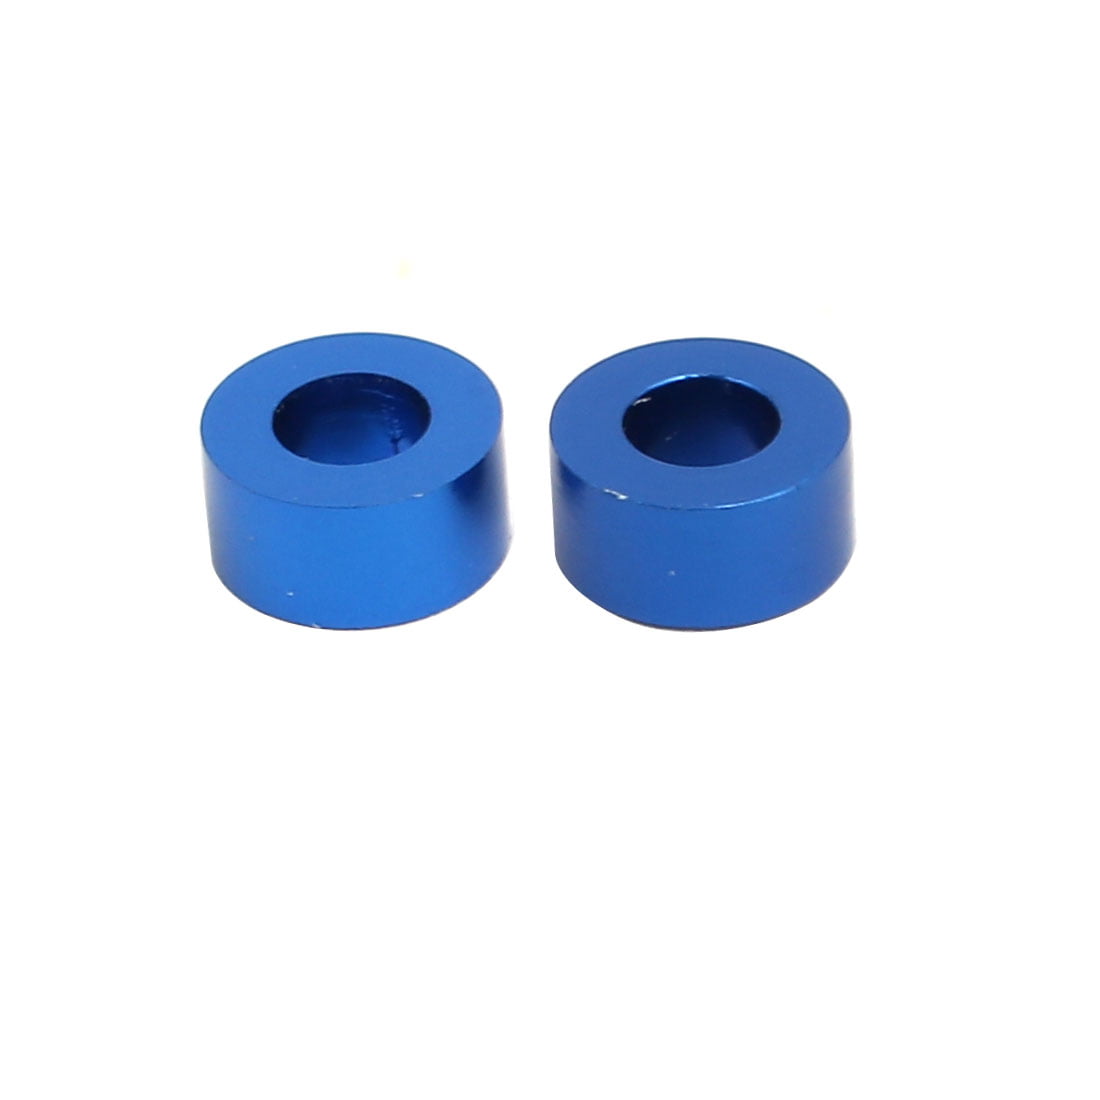 uxcell 20pcs 3mm Thickness M3 Aluminum Alloy Flat Fender Screw Washer Royal Blue 